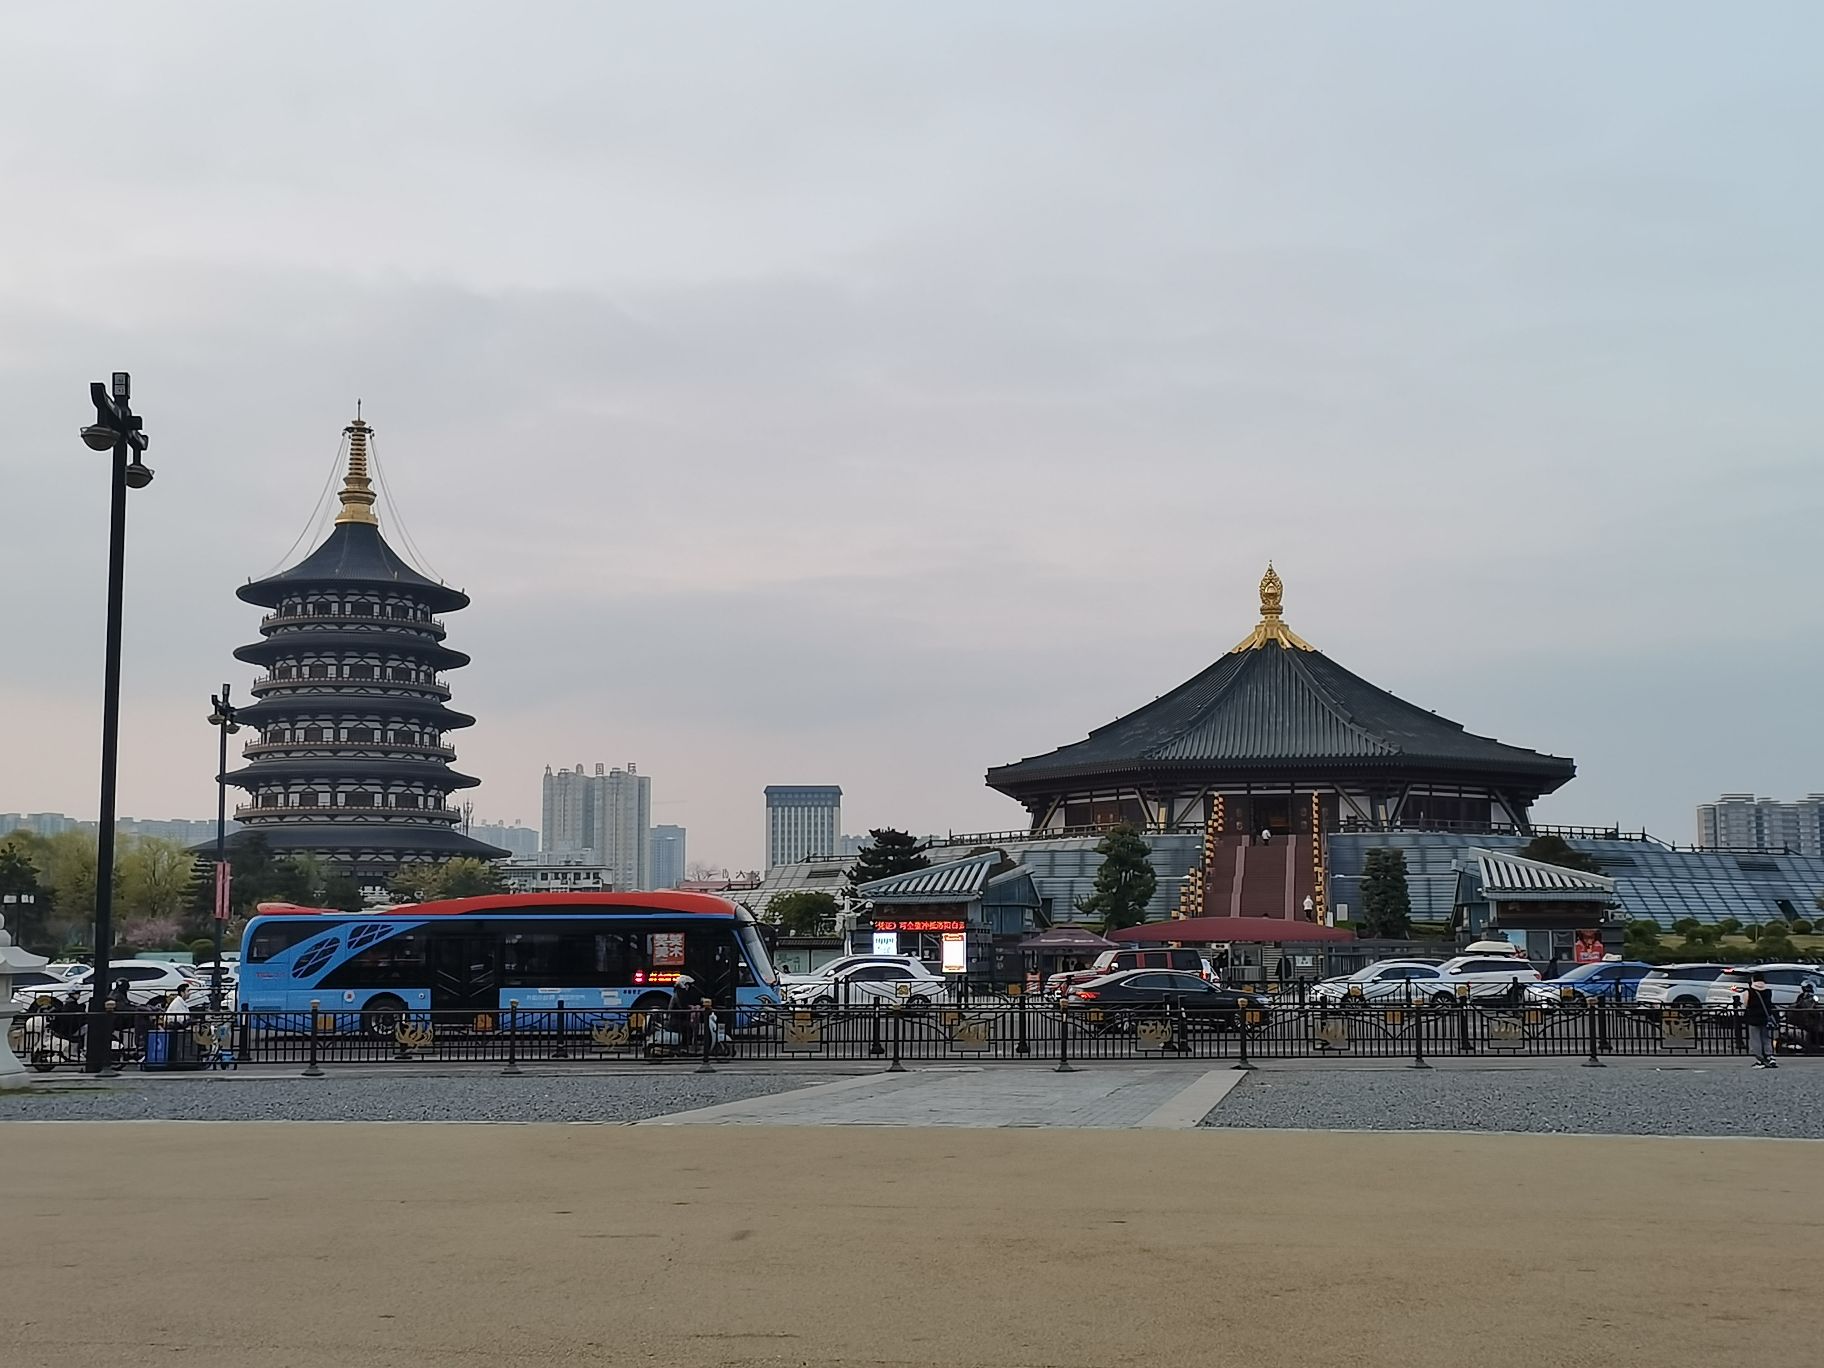 Luoyang Sui and Tang National Heritage Park